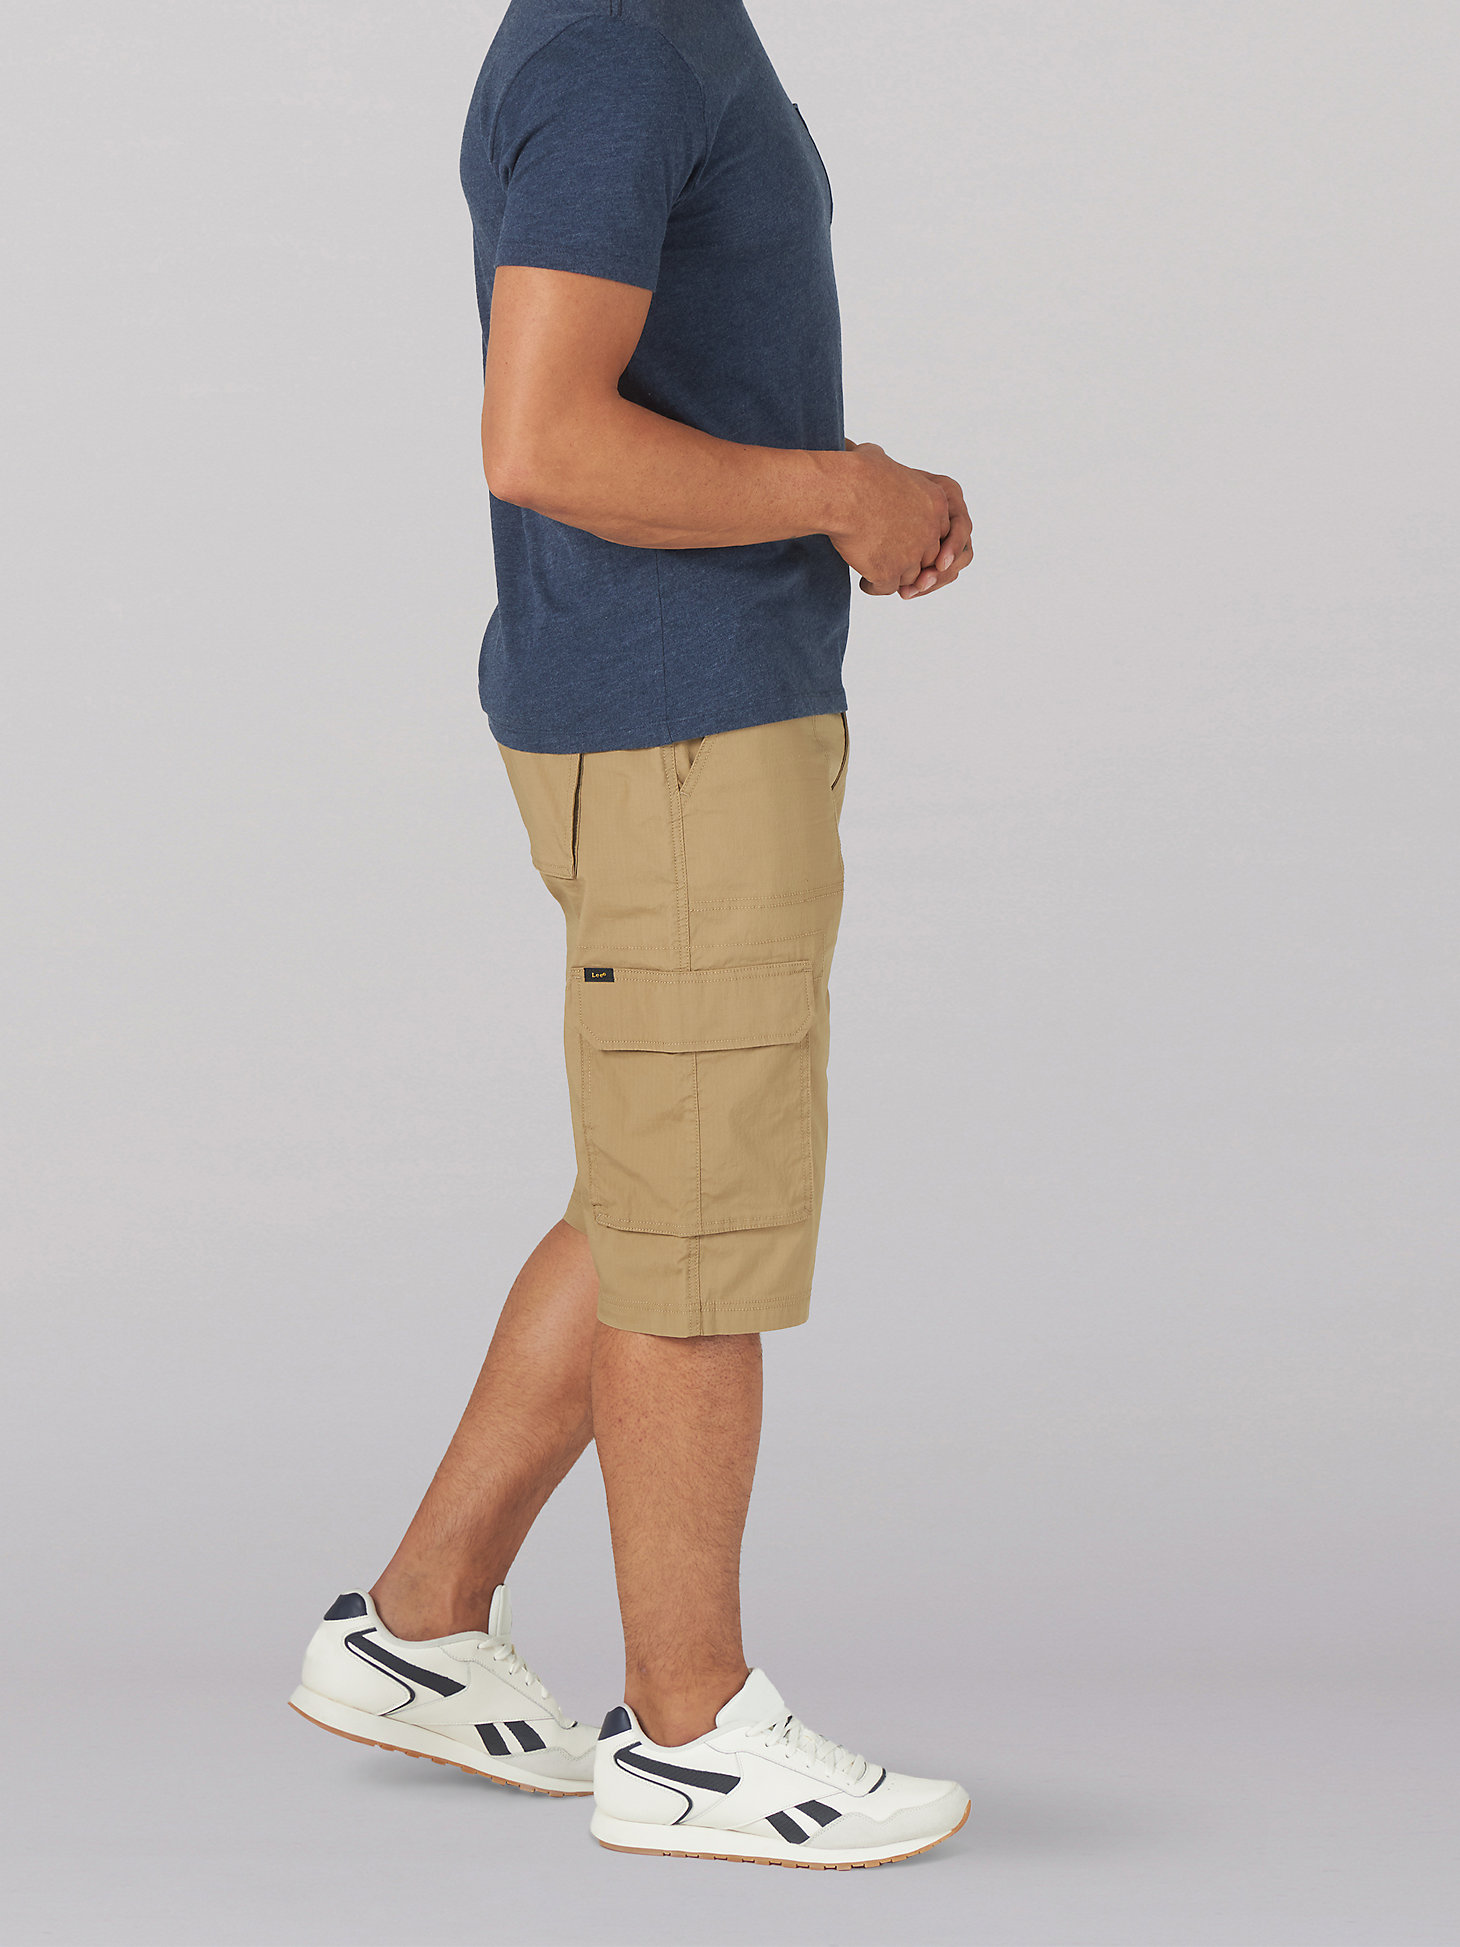 Men's Extreme Motion Cameron Relaxed Fit Cargo Short in KC Khaki alternative view 2